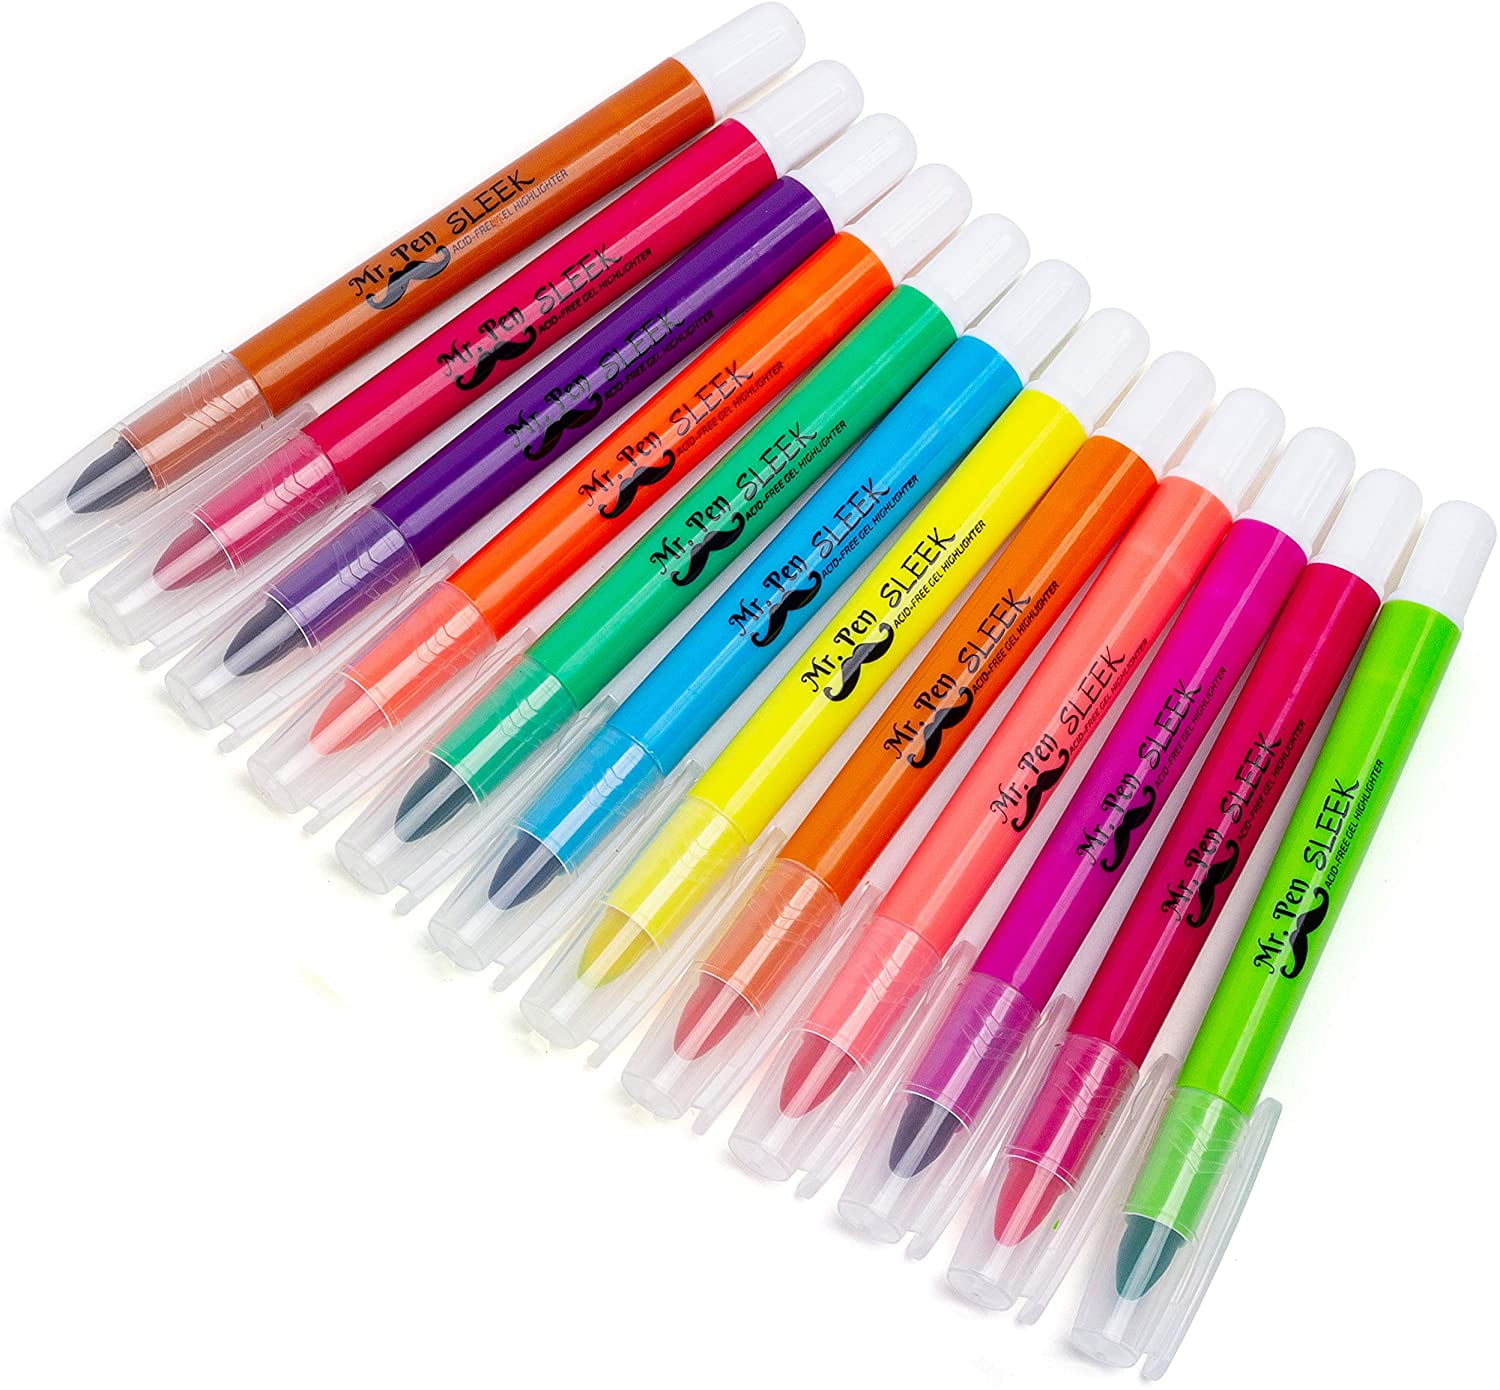 Enday Gel Highlighters Colored High Lighters for Bibles and School  Journaling No Bleed 1 Pack of 3